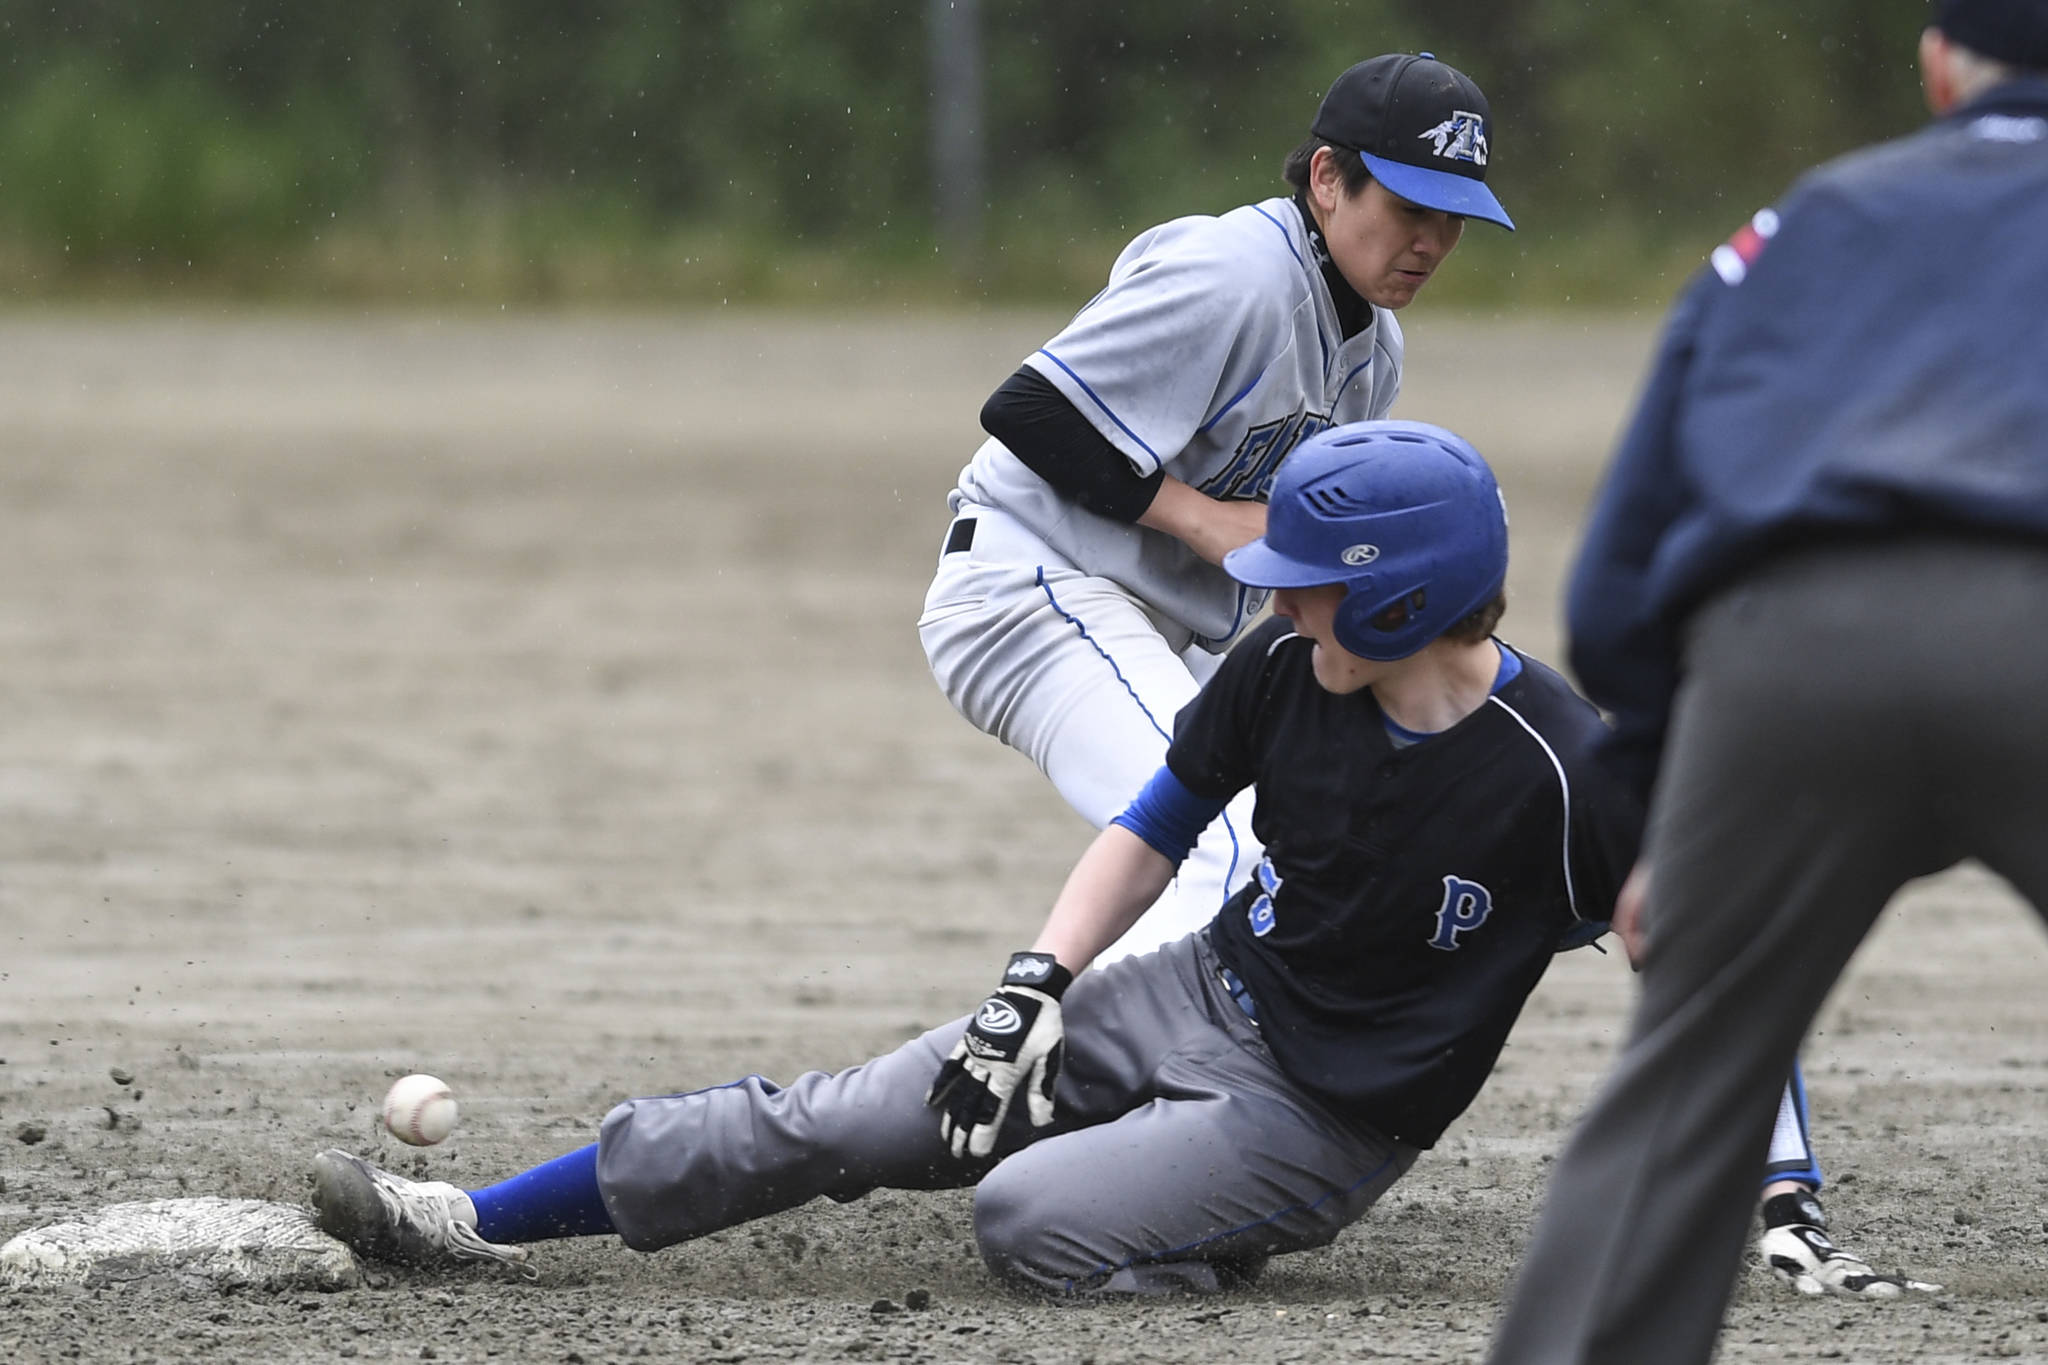 Petersburg’s Thomas Durkin slides safely into second base in the sixth inning as the ball gets away from Thunder Mountain’s Oliver Mendoza during the Region V Baseball Championship at Adair-Kennedy Memorial Park on Thursday, May 23, 2019. Petersburg won 4-1. (Michael Penn | Juneau Empire)